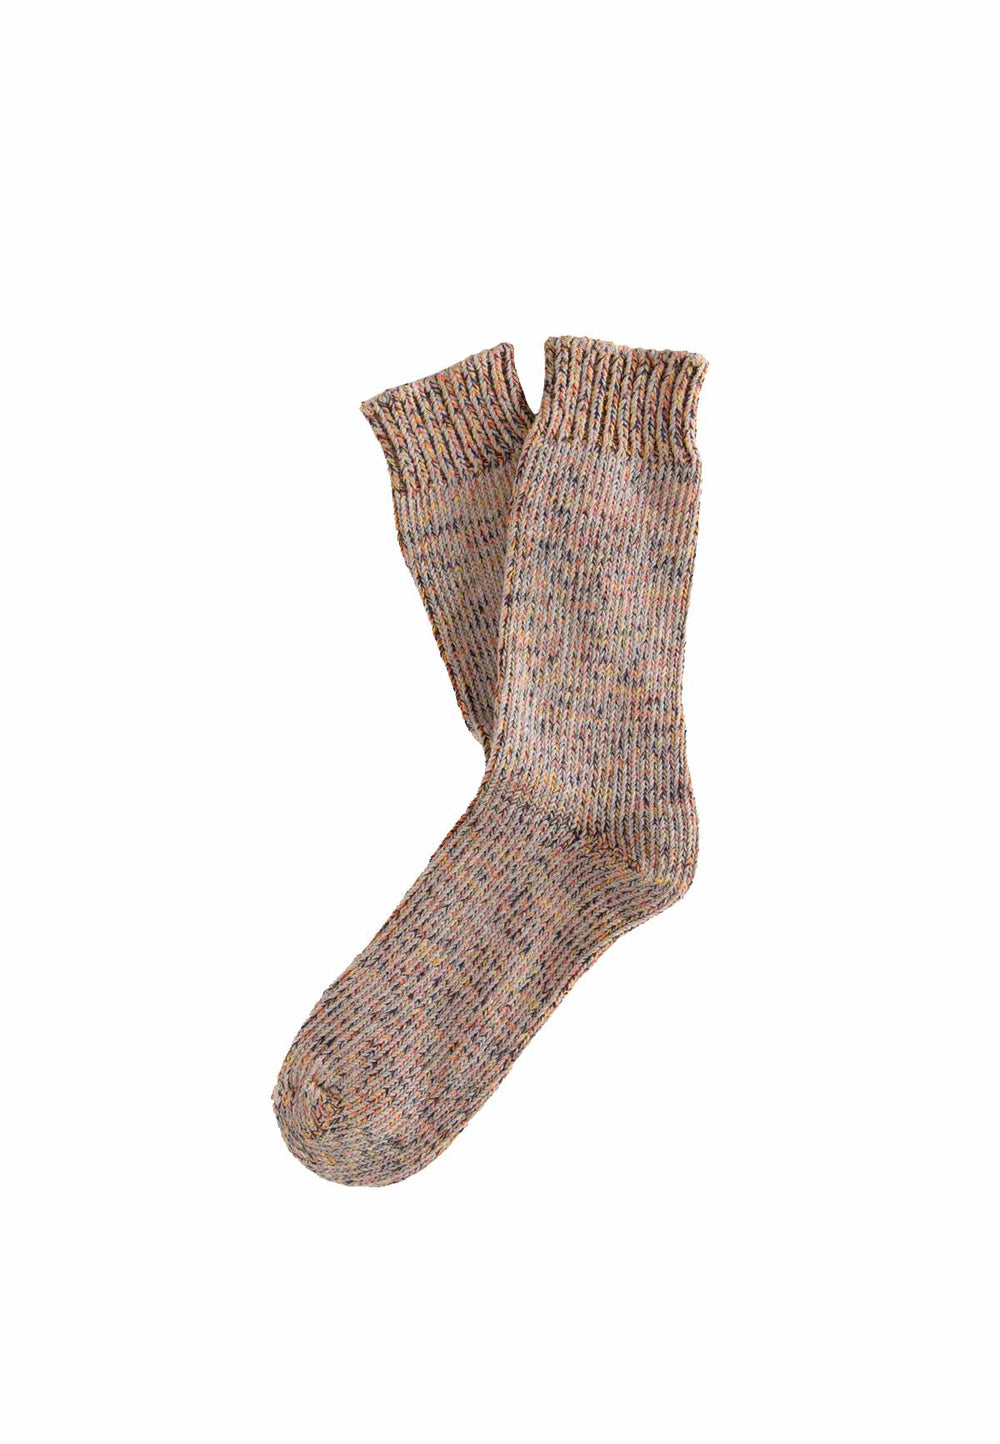 RECYCLED COTTON TRUE SOCKS CAMEL - Moeon